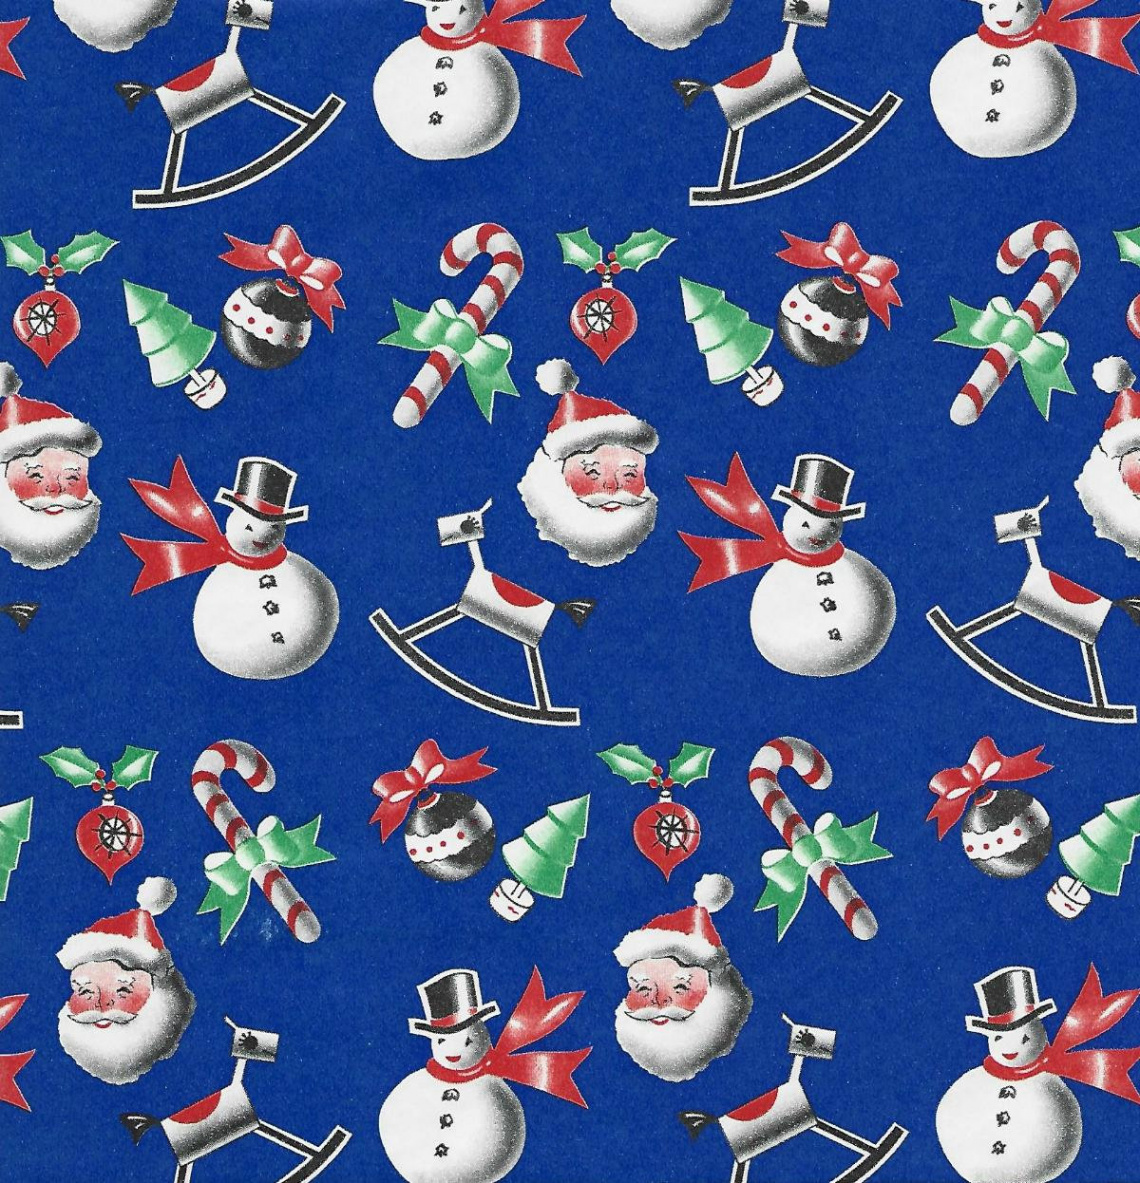 s Christmas Wrapping Paper/Tissue Paper Santa Face Snowman Candy Canes  Ornaments on Blue Vintage Christmas Gift Wrap One Flat Sheet